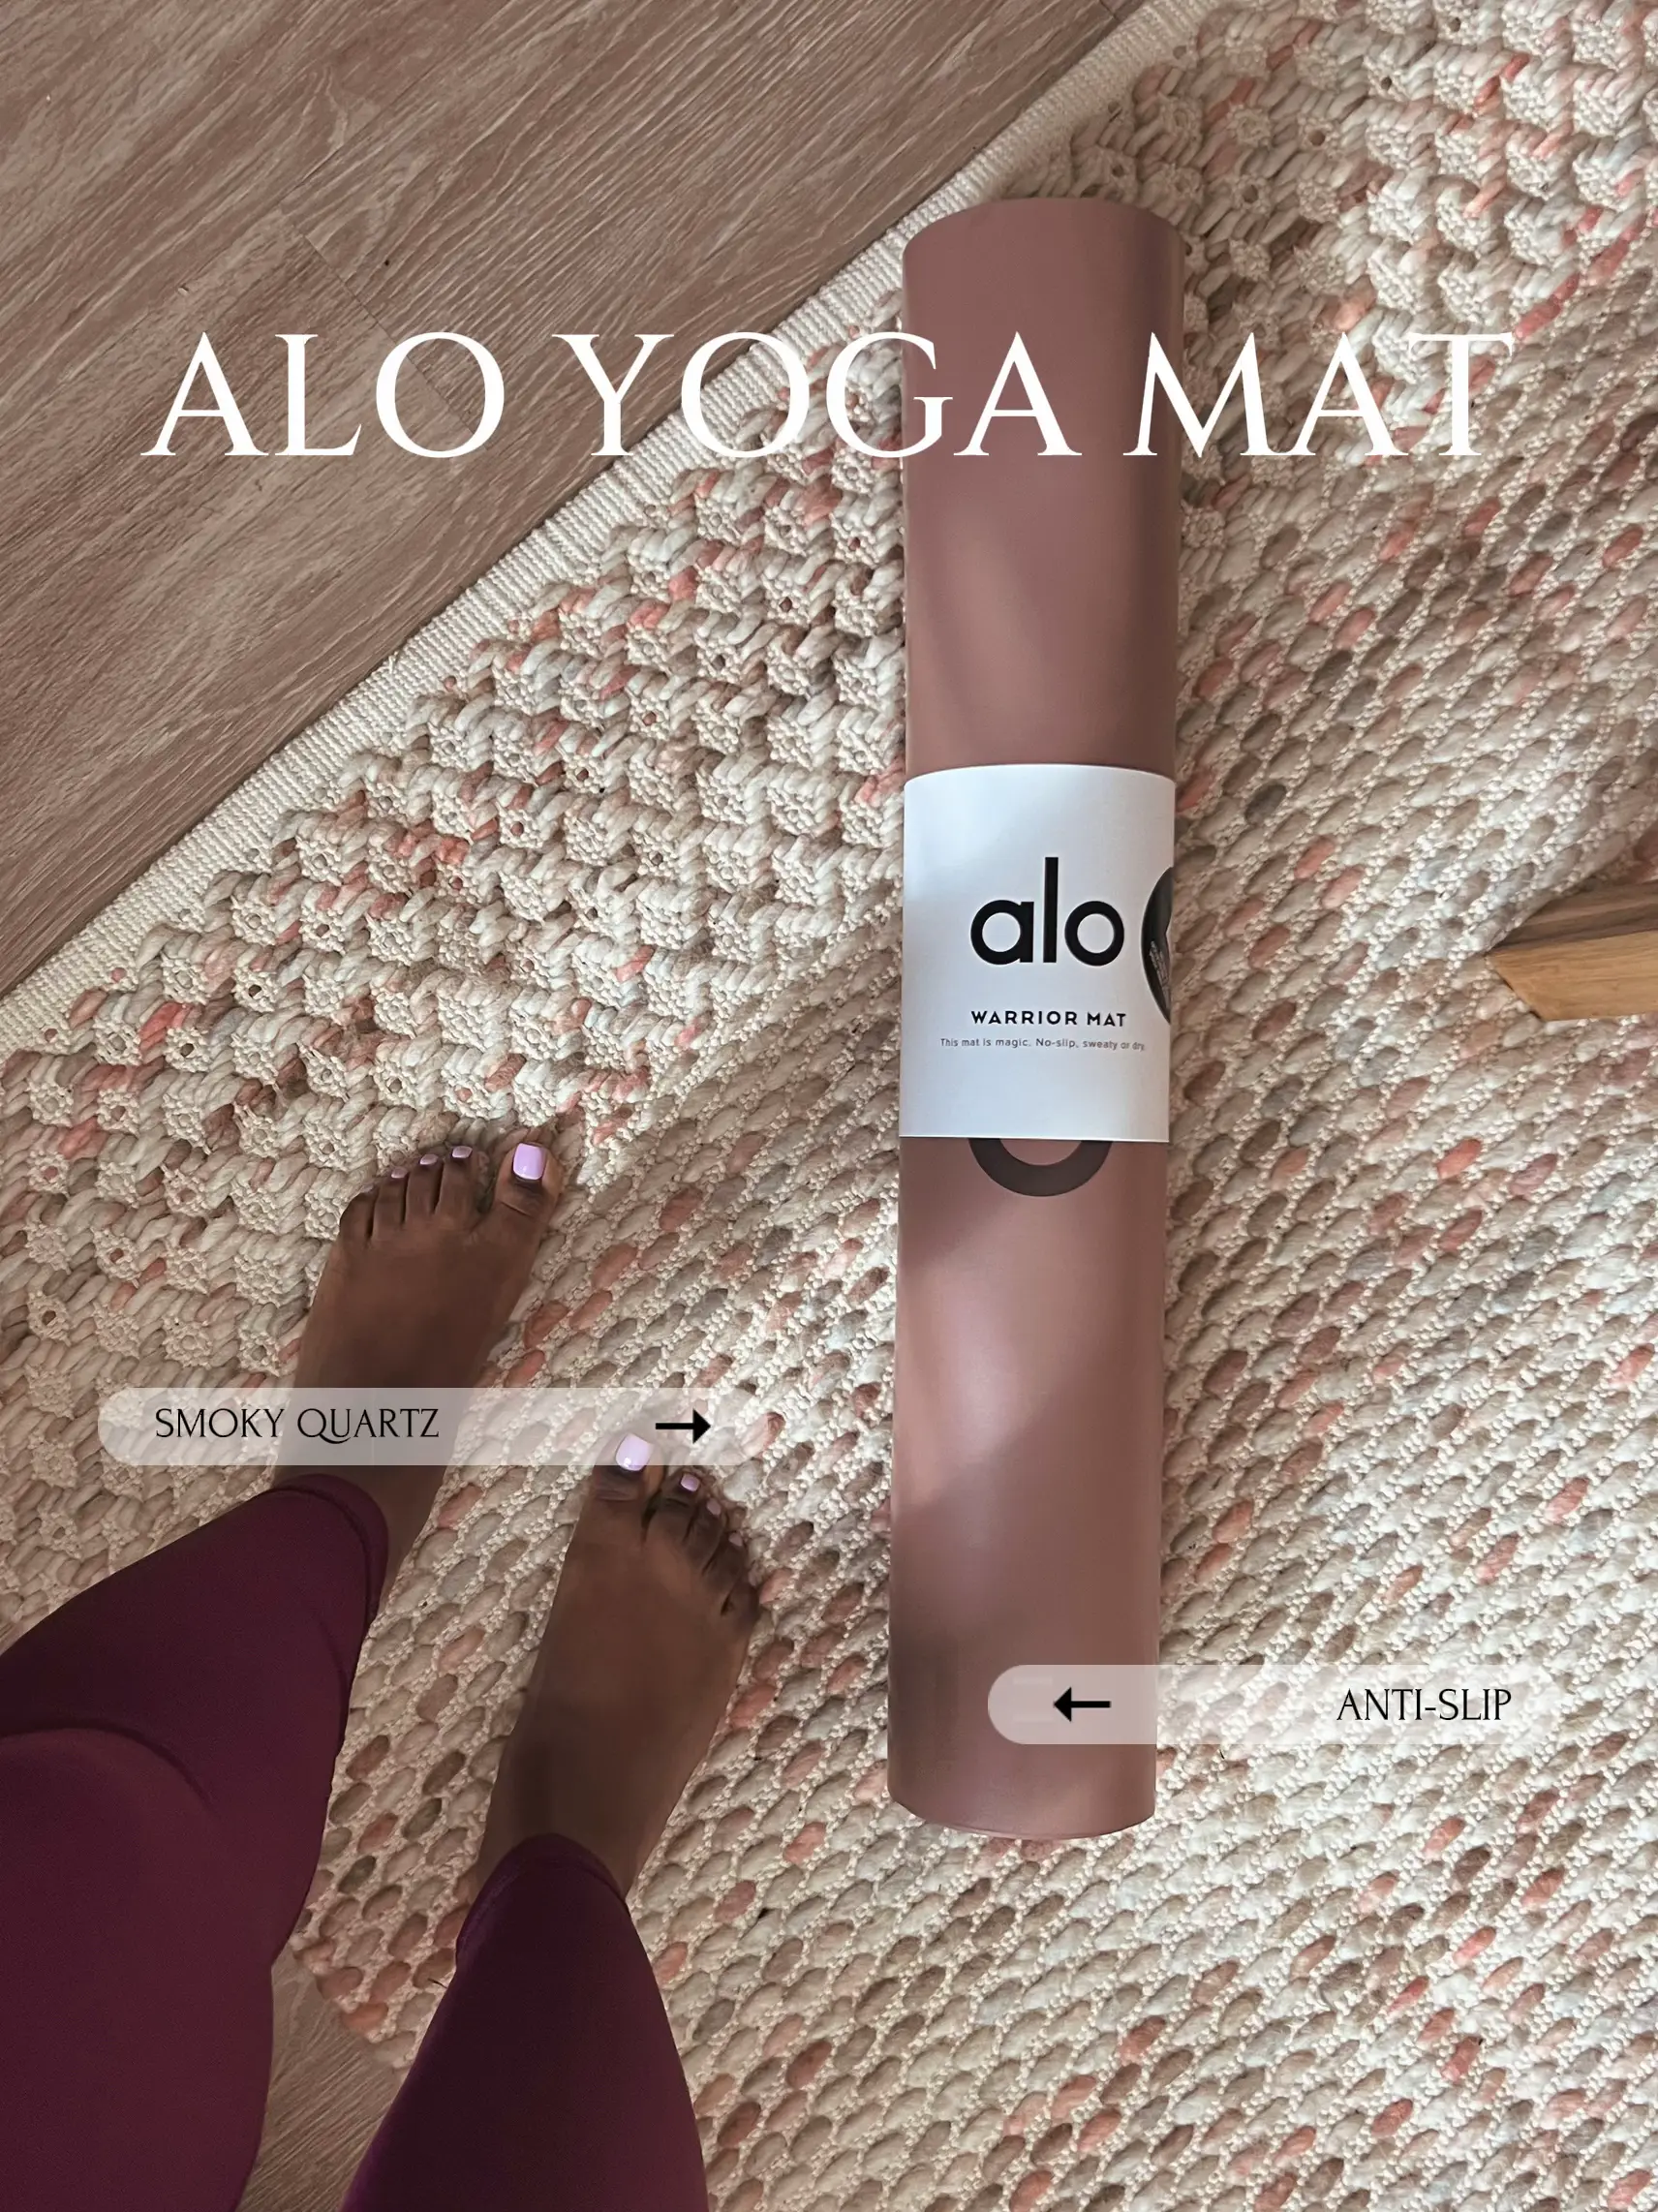 ALO YOGA MAT, Gallery posted by Kristina Renee